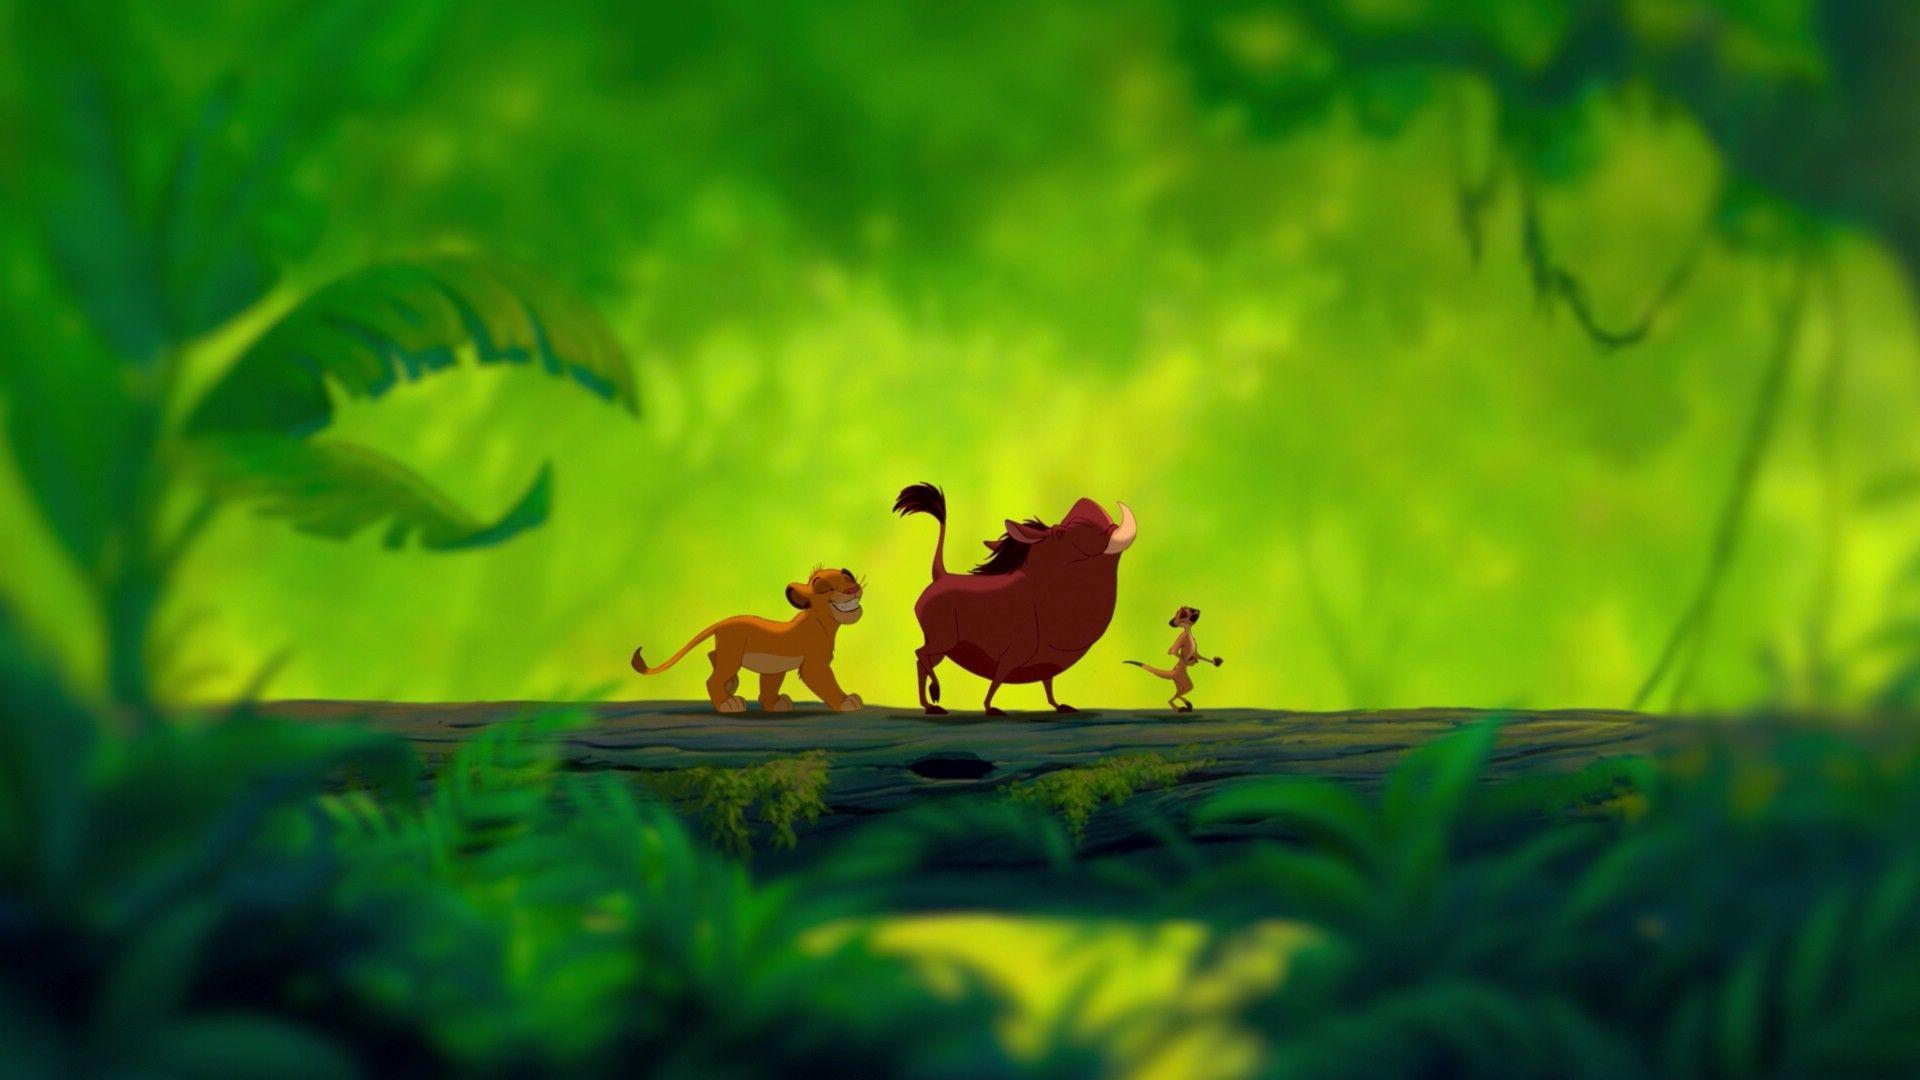 Lion King 4K Wallpapers - Top Free Lion King 4K Backgrounds